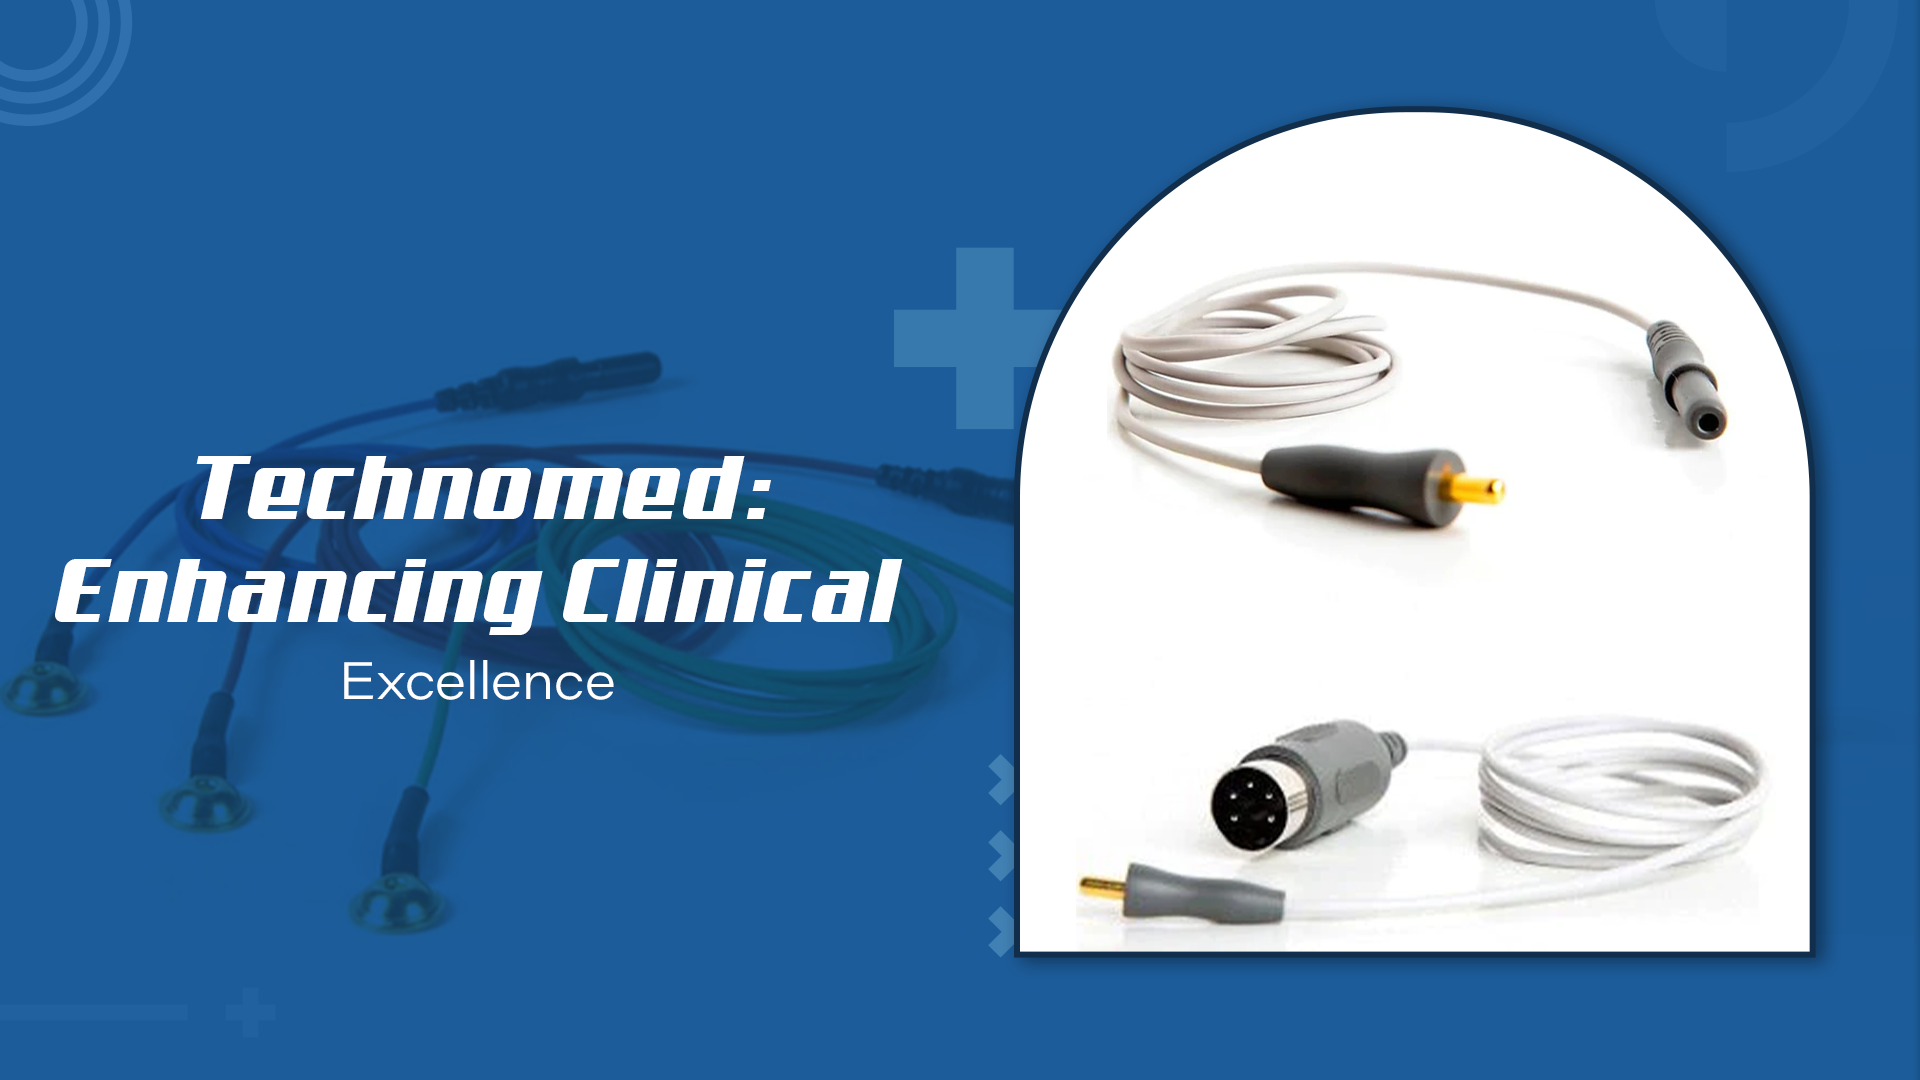 Technomed at MFI Medical - Advancing Clinical Excellence through Cutting-Edge Medical Solutions